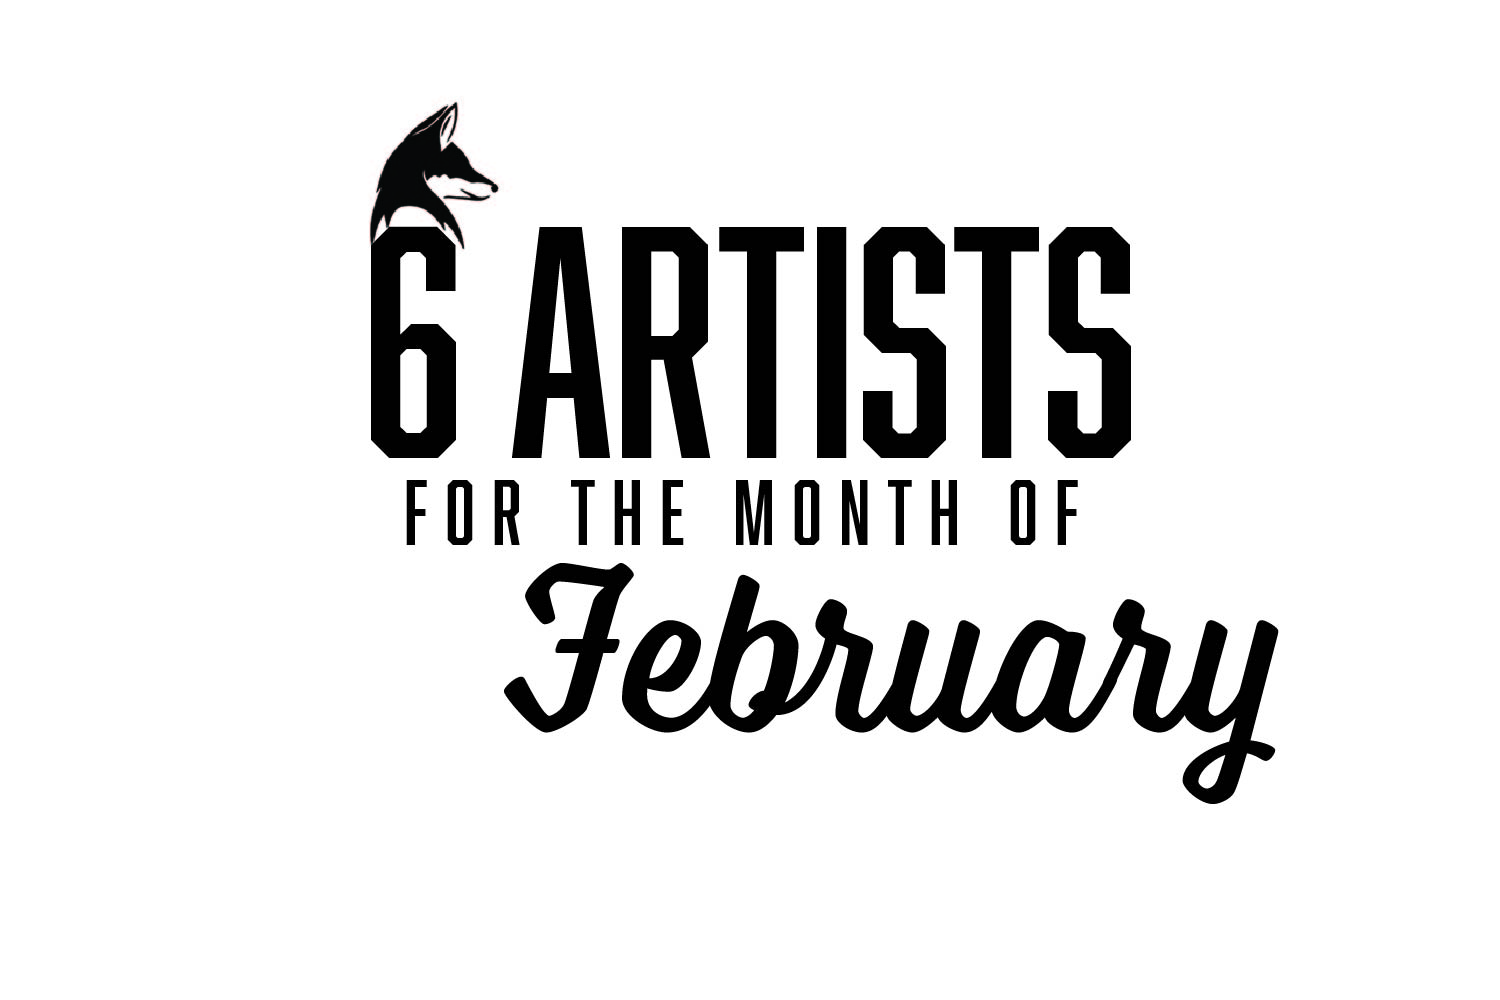 Six Artists You Should Be Listening To: February 2021 EDITION